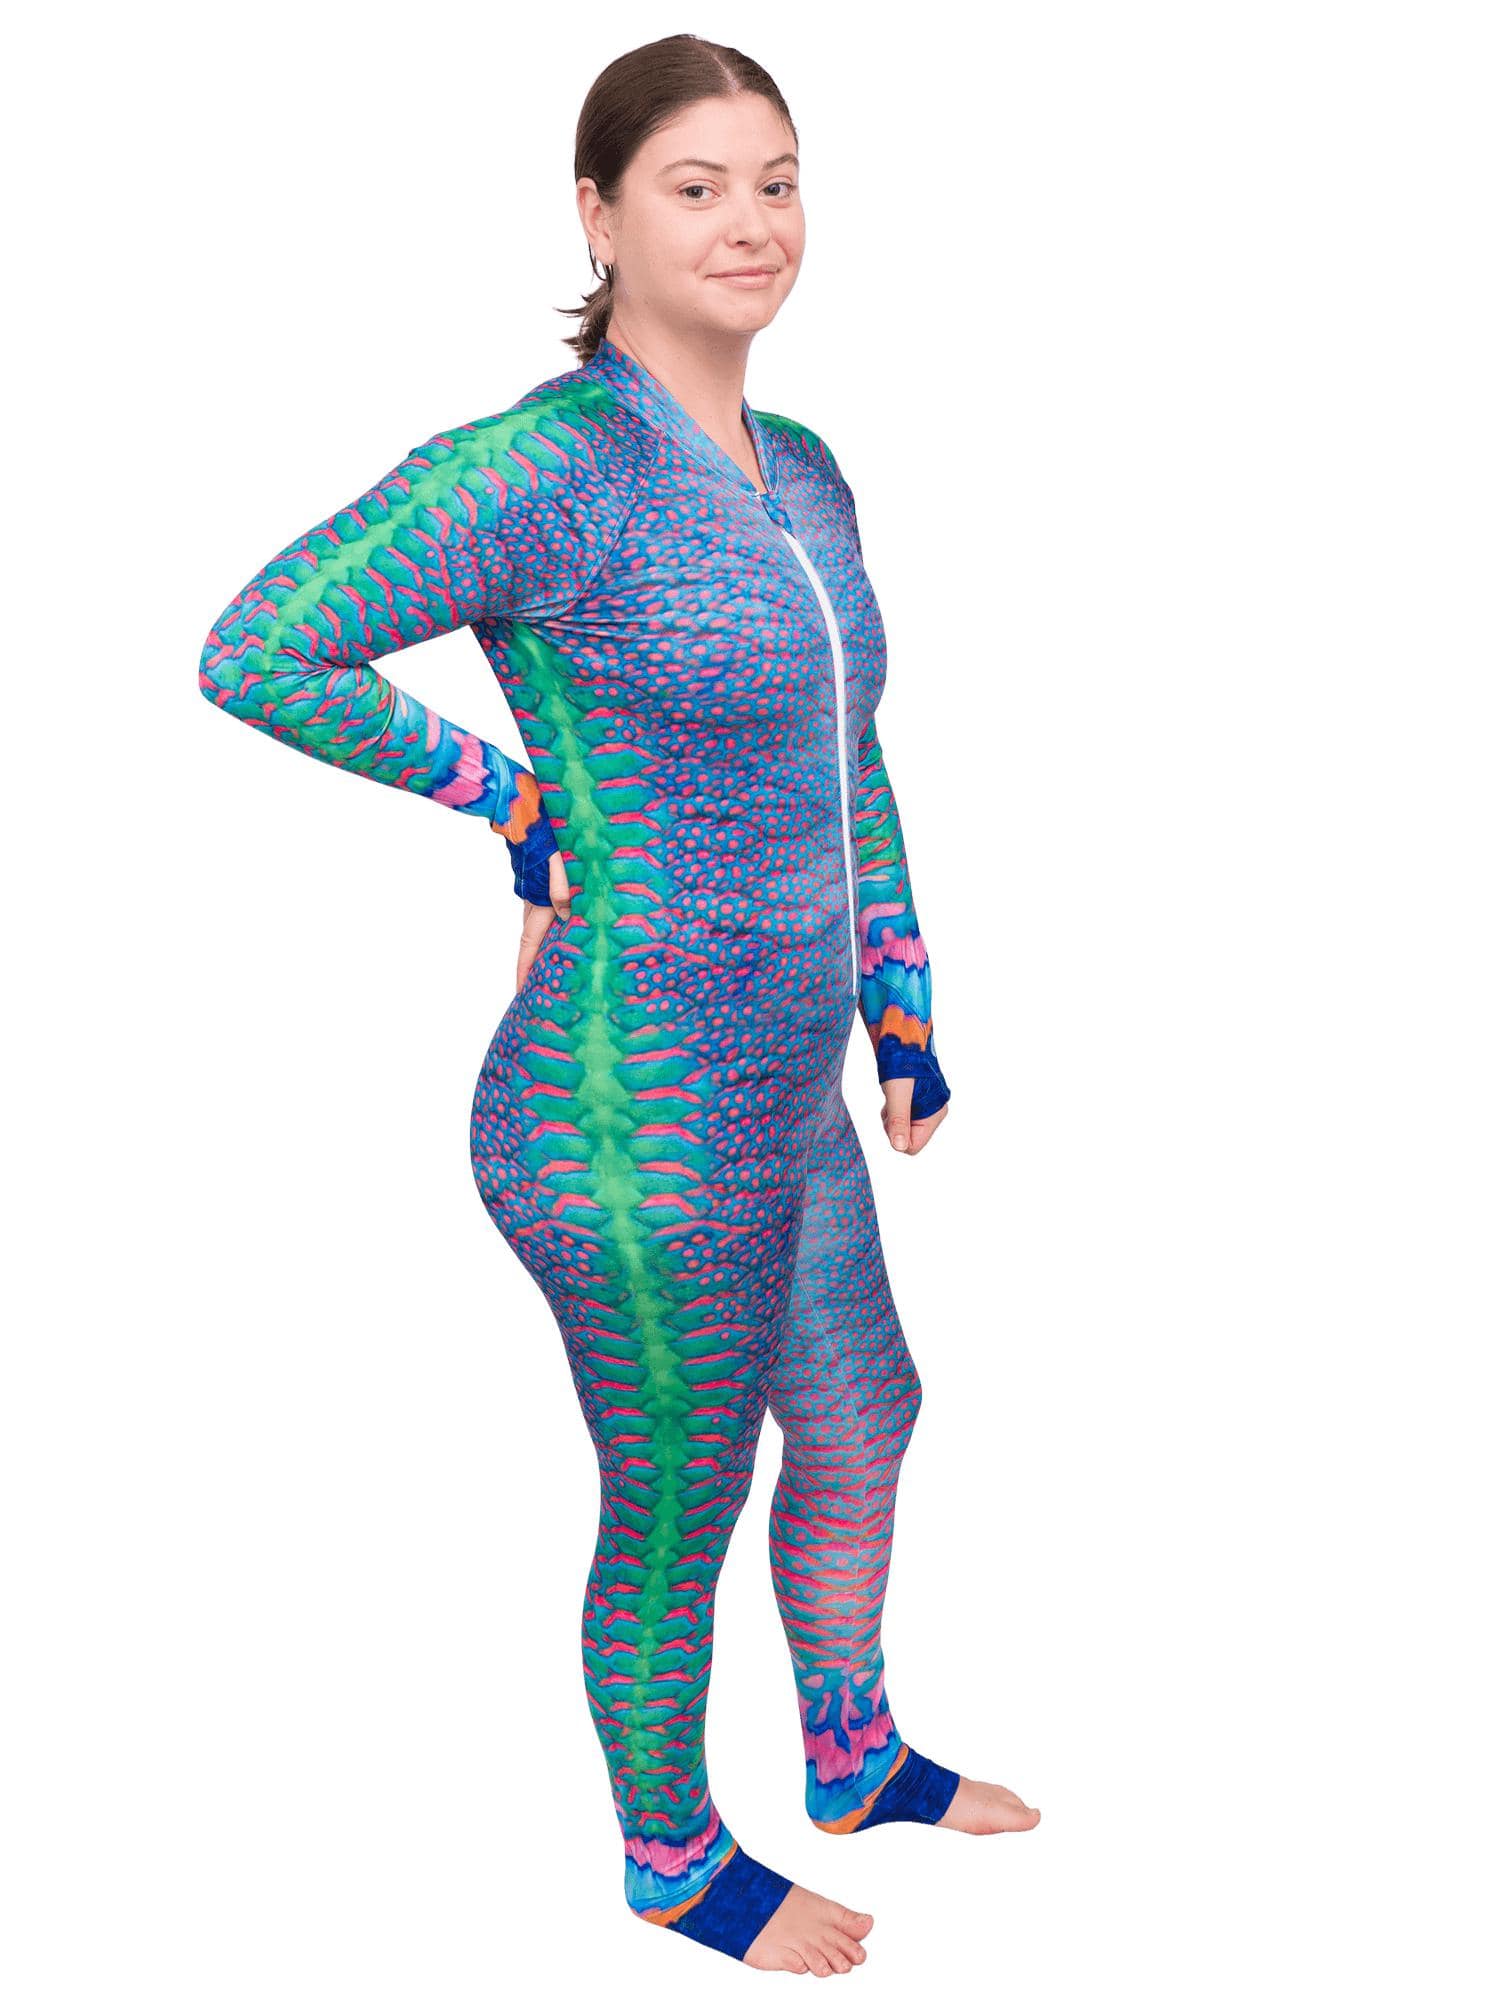 Premium Photo  A woman with a blue body suit and red skin has a